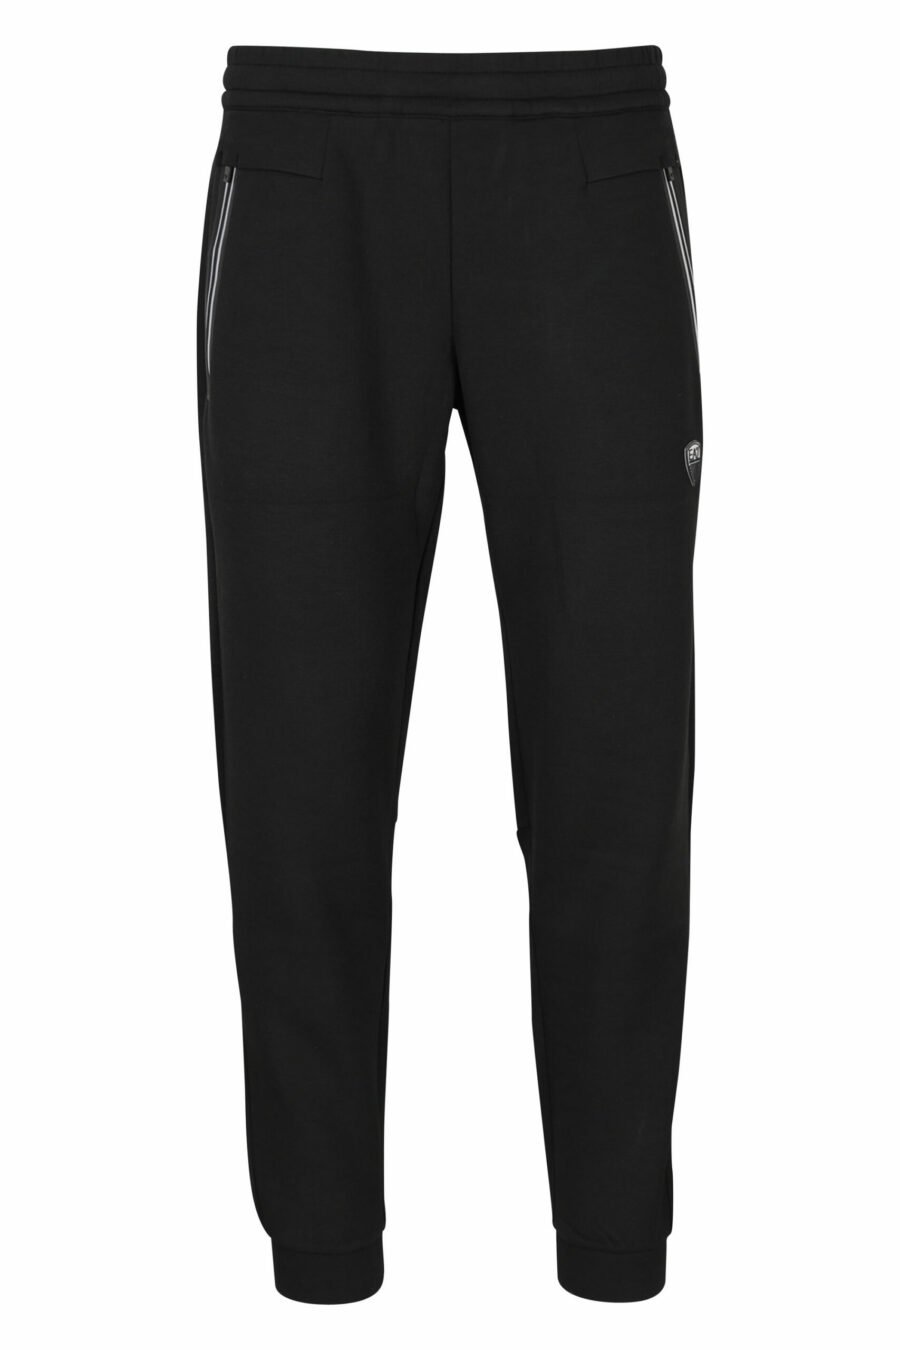 Tracksuit bottoms black with mini logo shield "lux identity" - 8056787978737 scaled